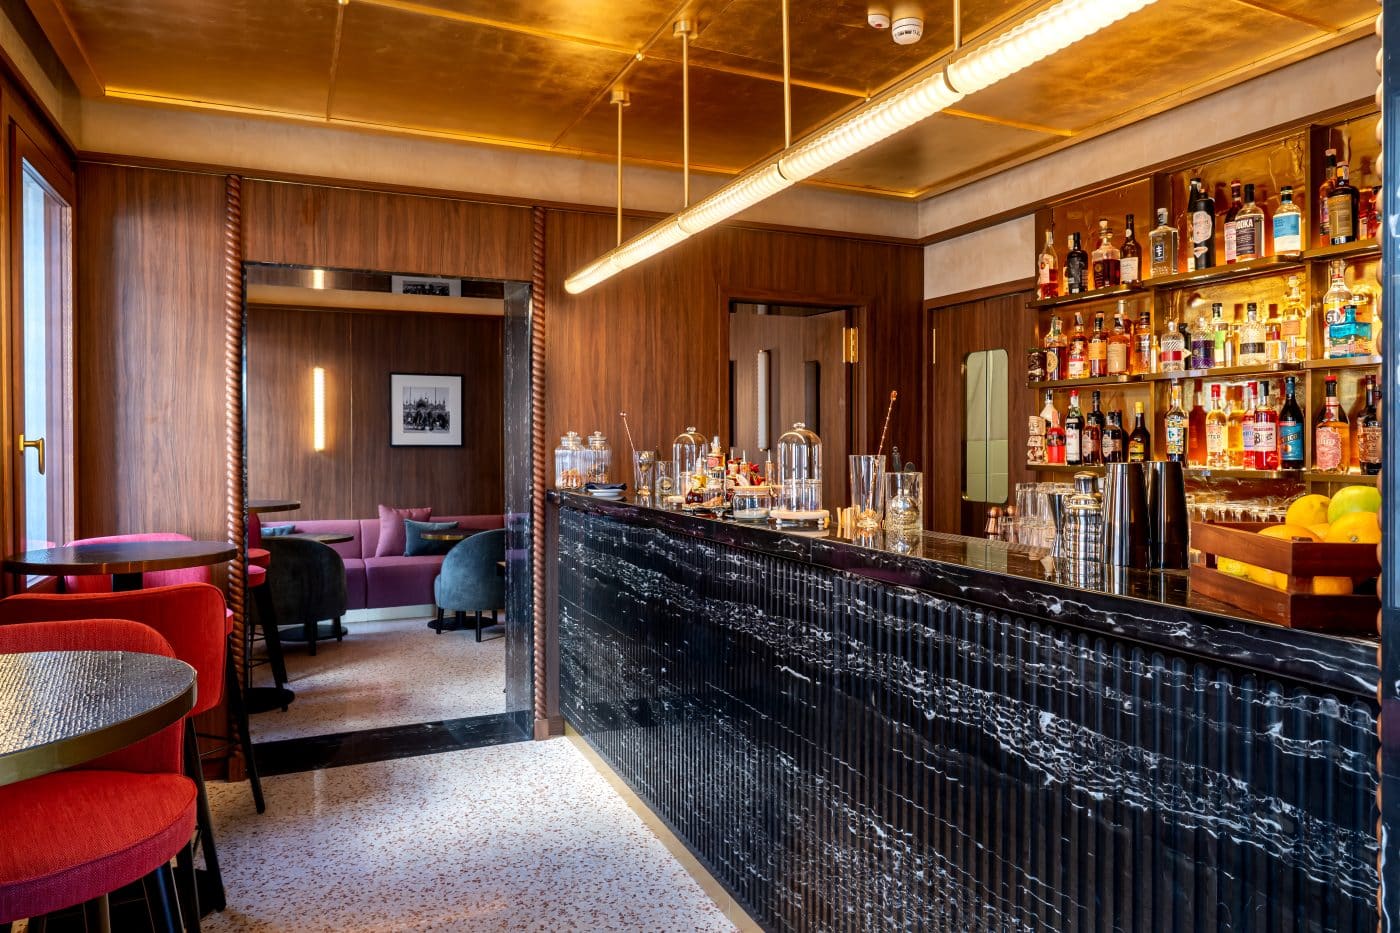 Venice's new Ca' di Dio hotel bar with terrazzo floor, black marble bar front and red upholstered chairs at round tables. Hotel architecture and interior design by Patricia Urquiola